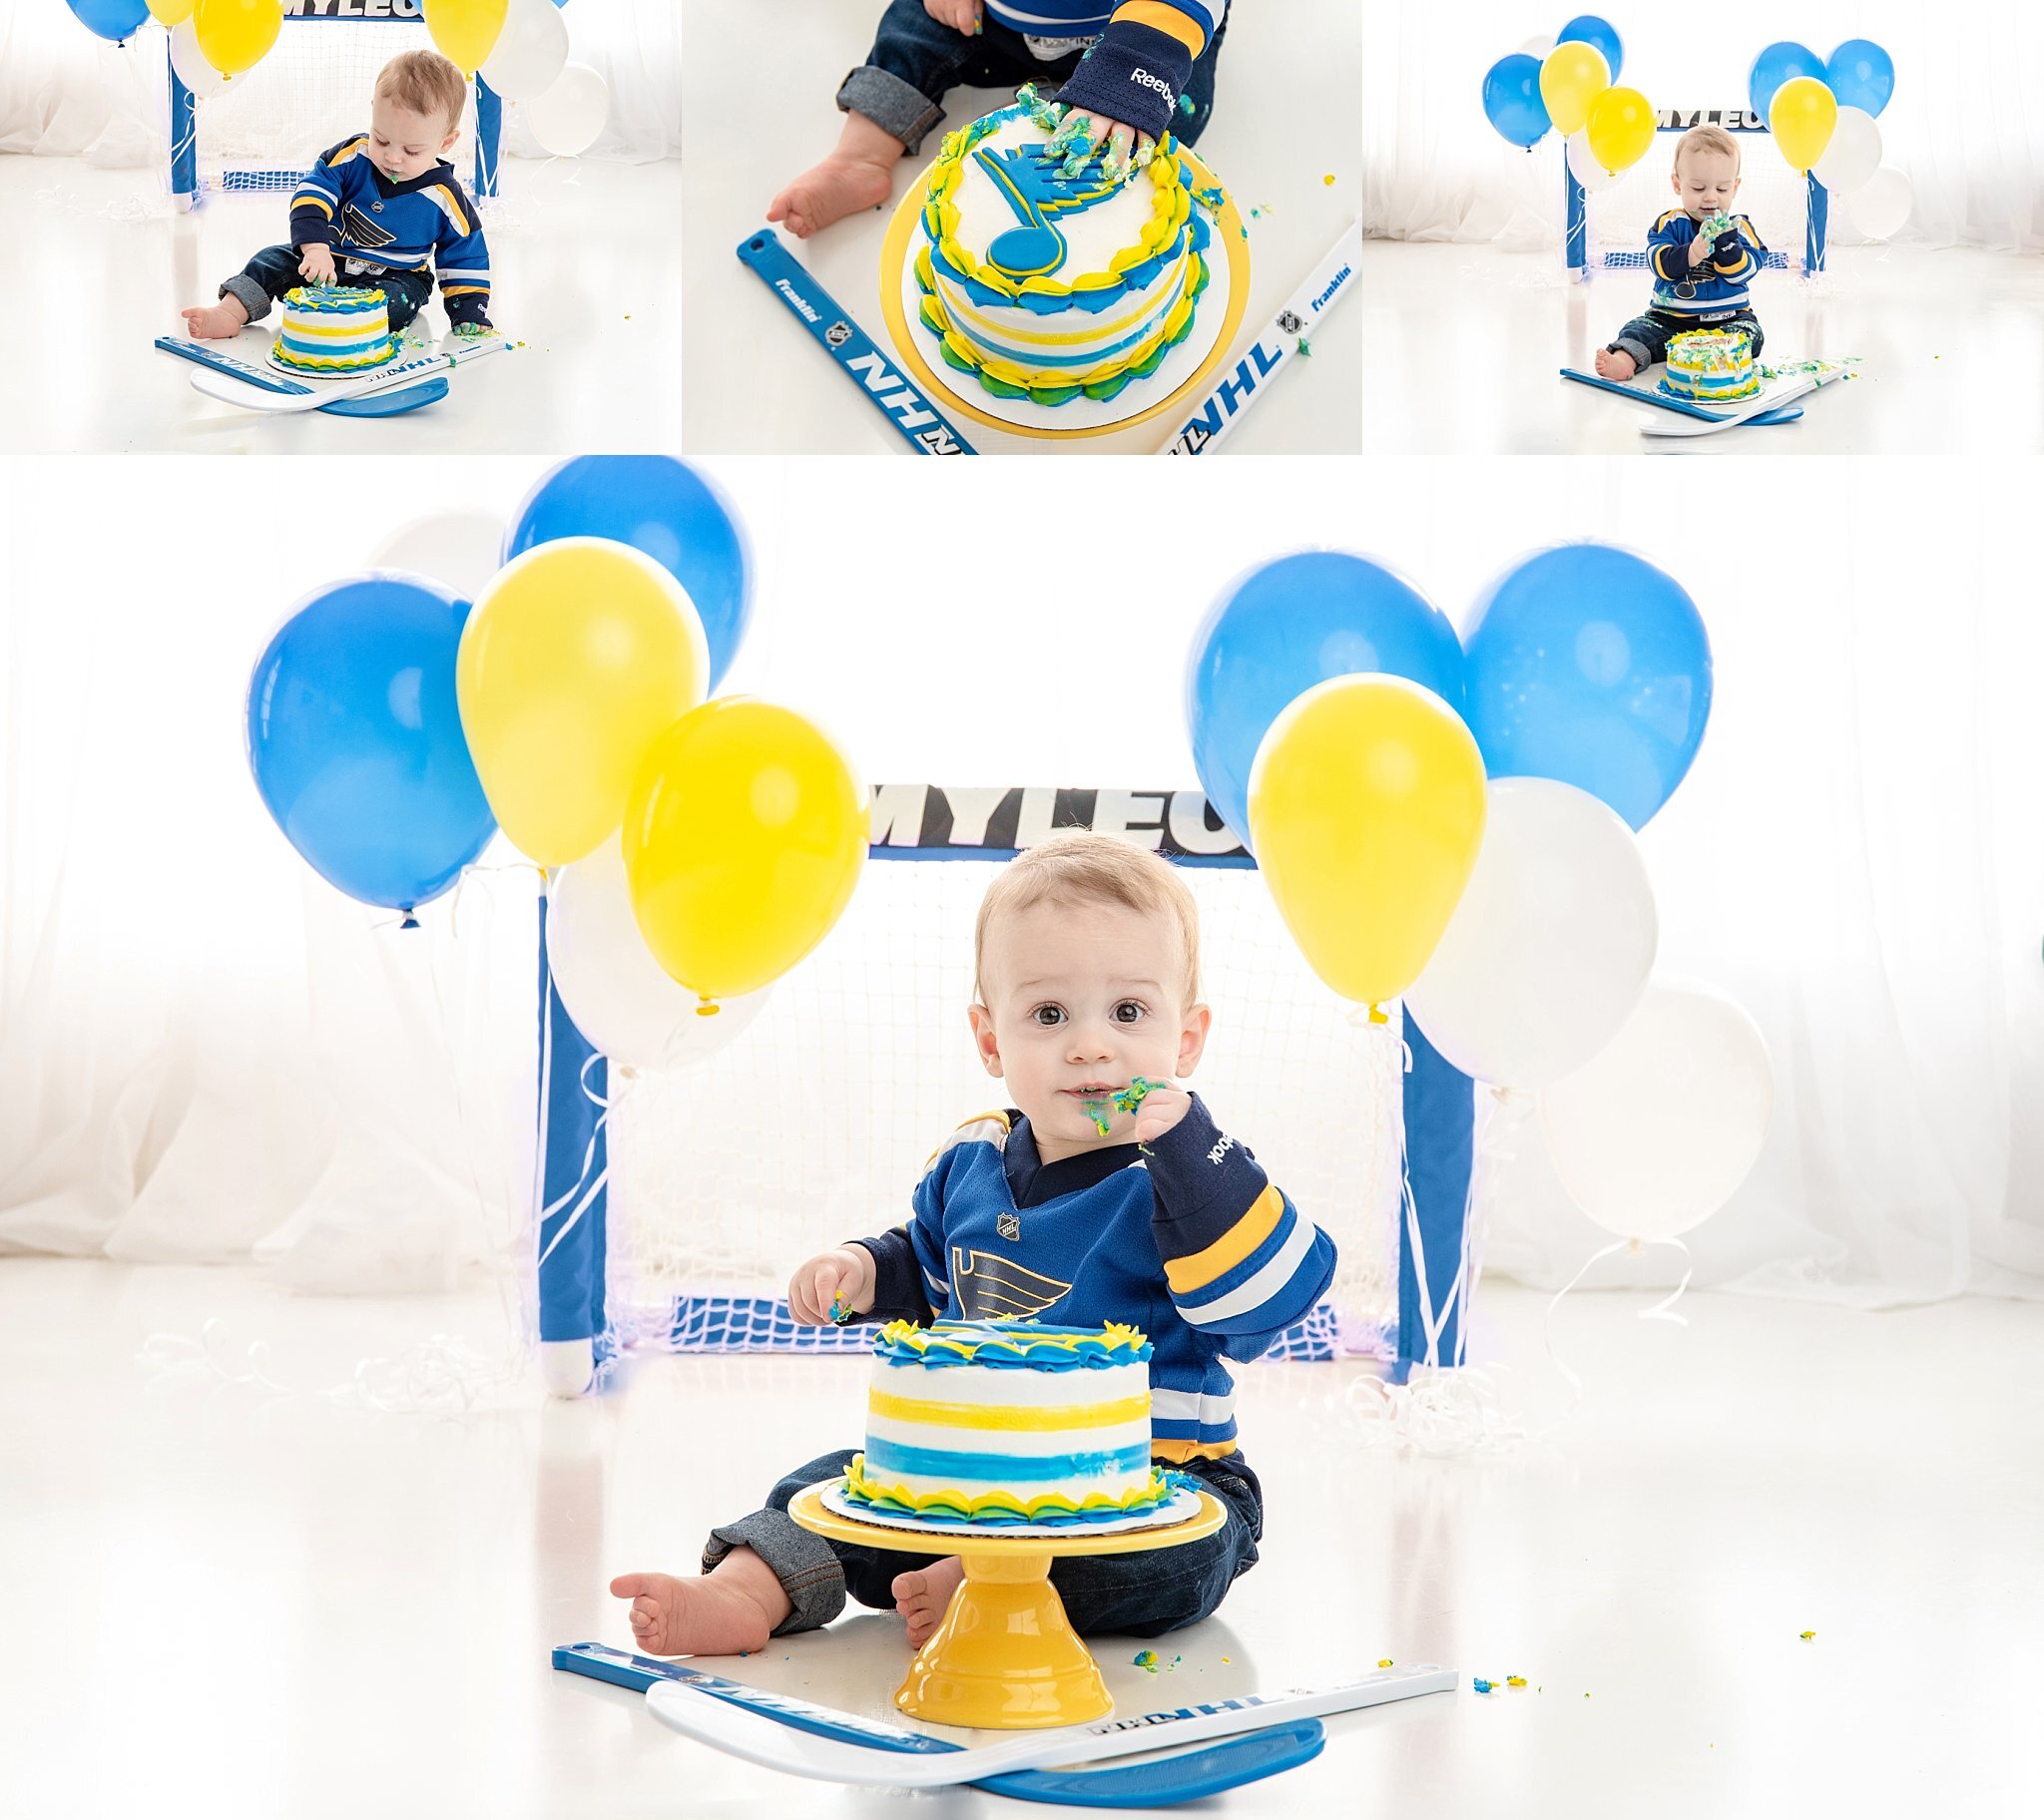 st-louis-cake-smash-photographer-st-louis-blues-theme-cake-birthday-boy-looking-down-at-blues-cake-with-net-and-balloons.jpg